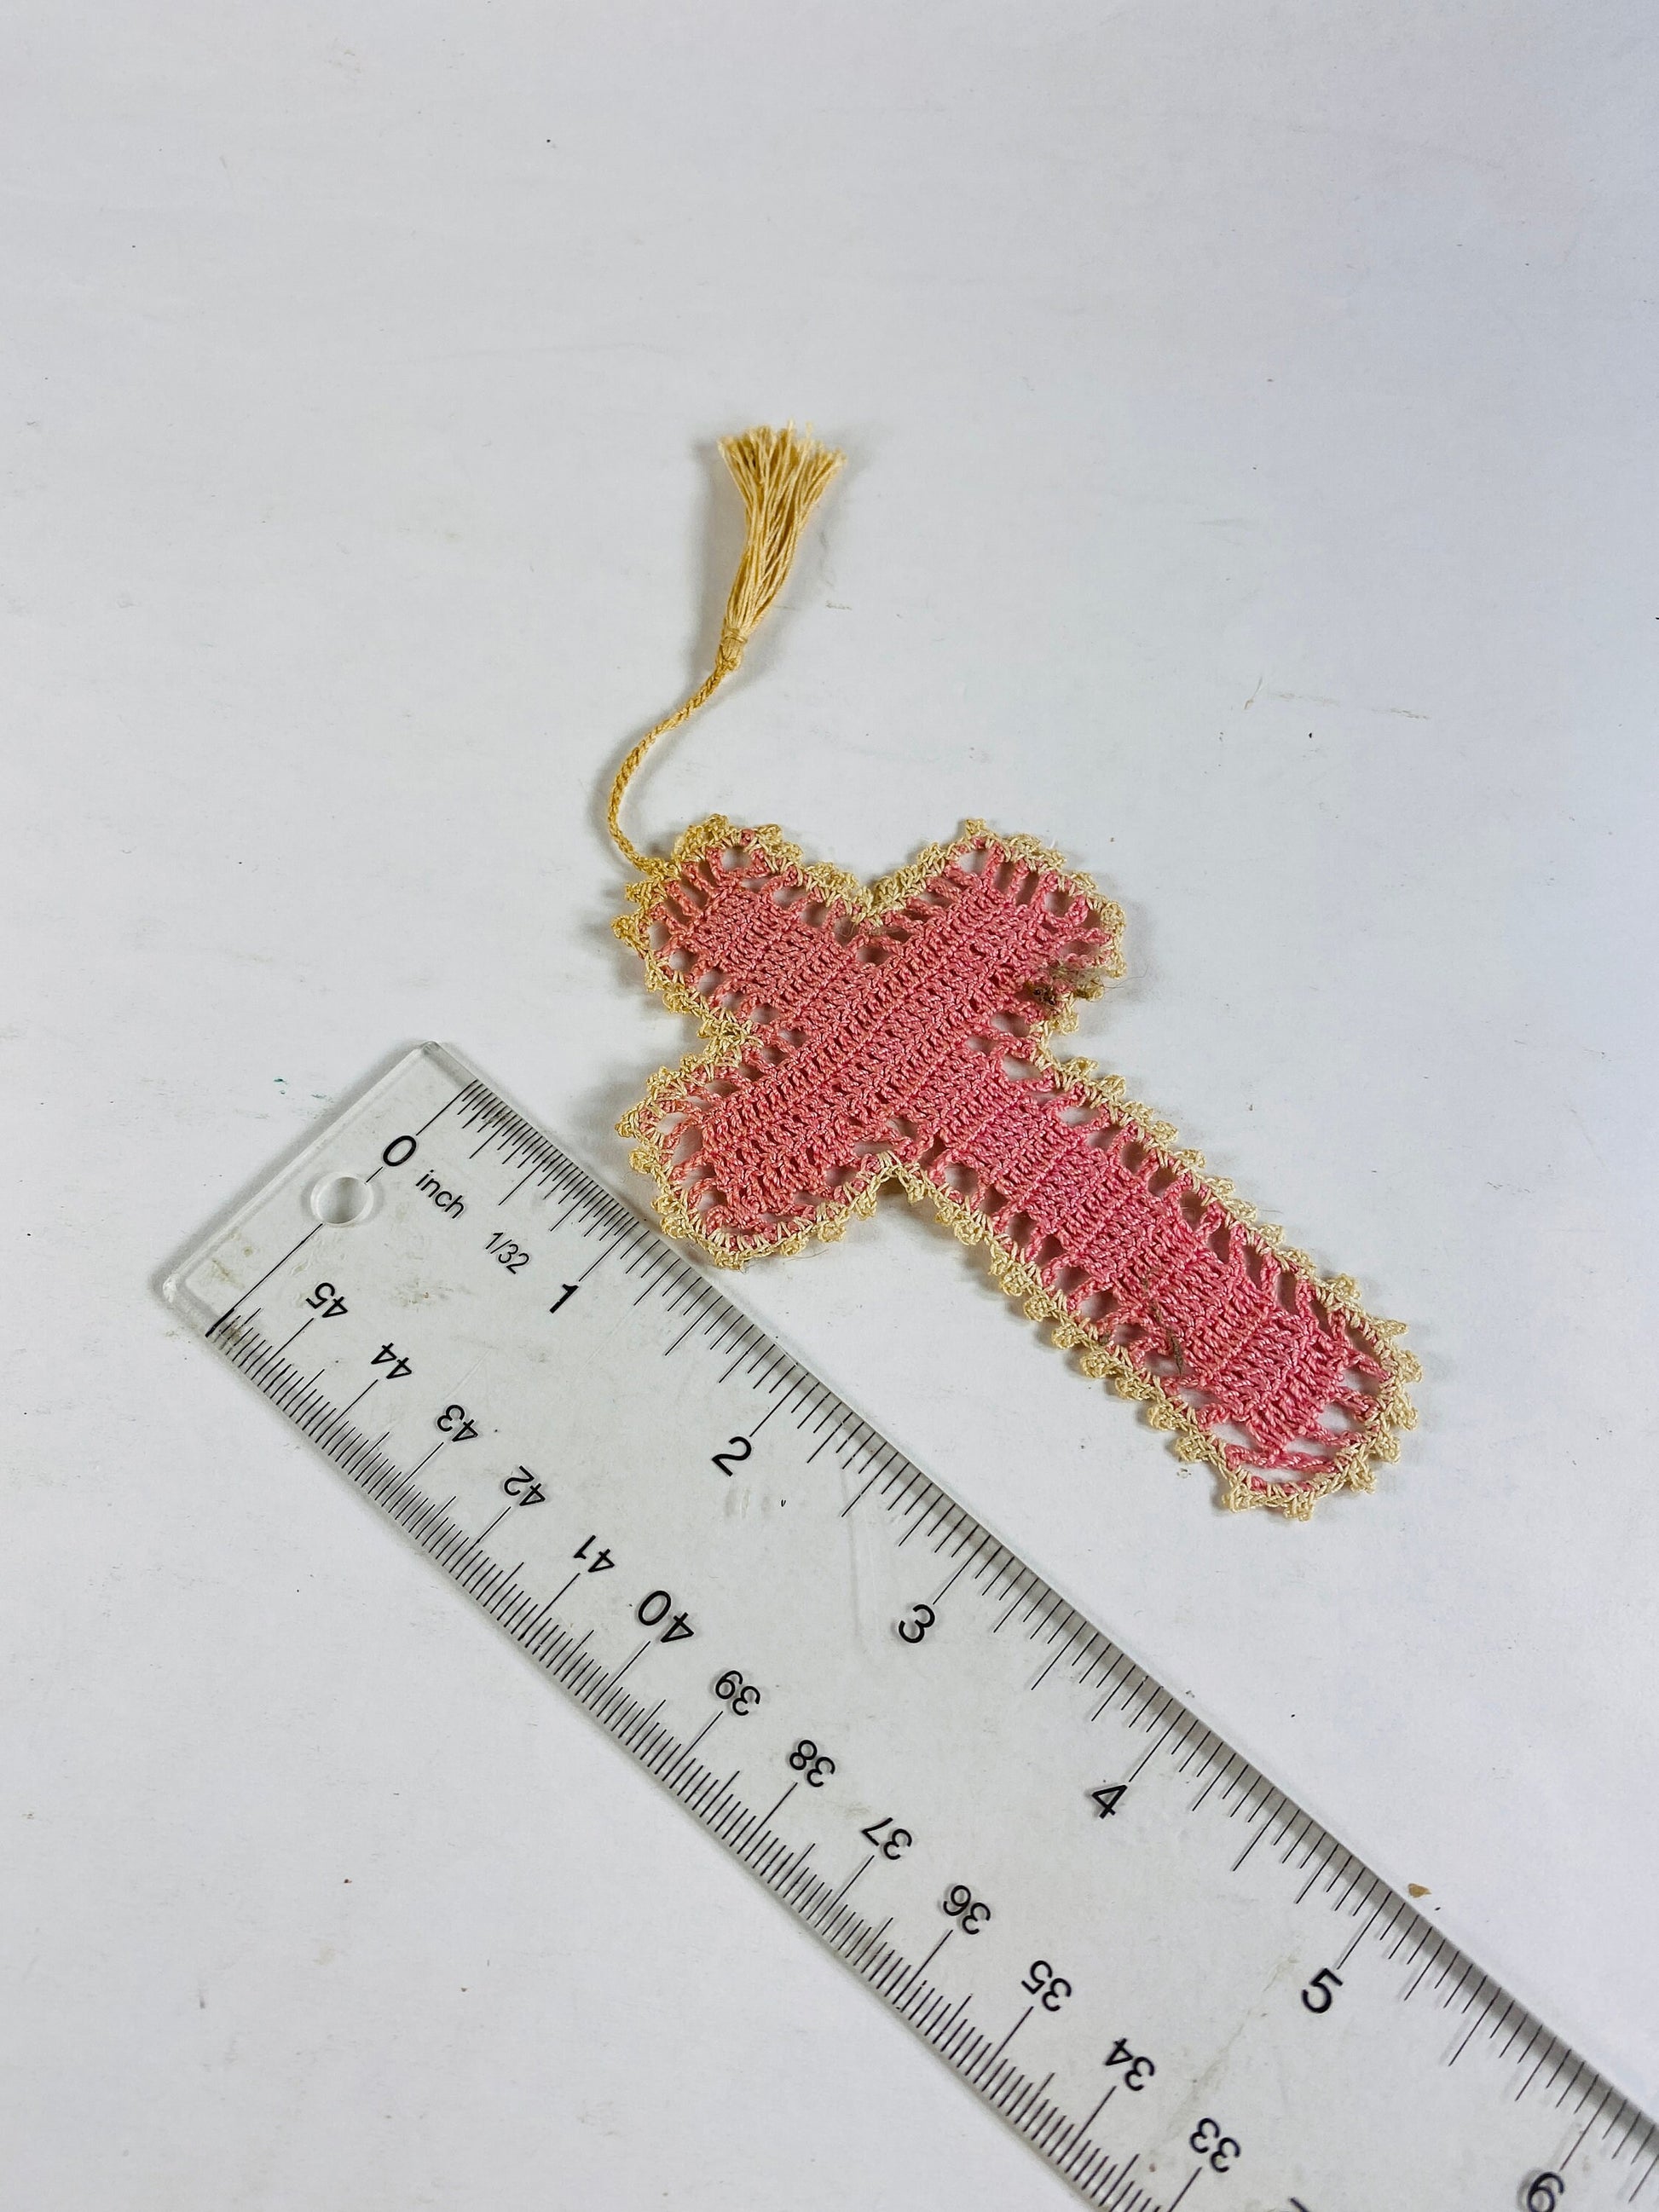 Vintage handmade pink cross bookmark Crochet knitted or macrame religious bookmark unique Christian bible gift! Jesus